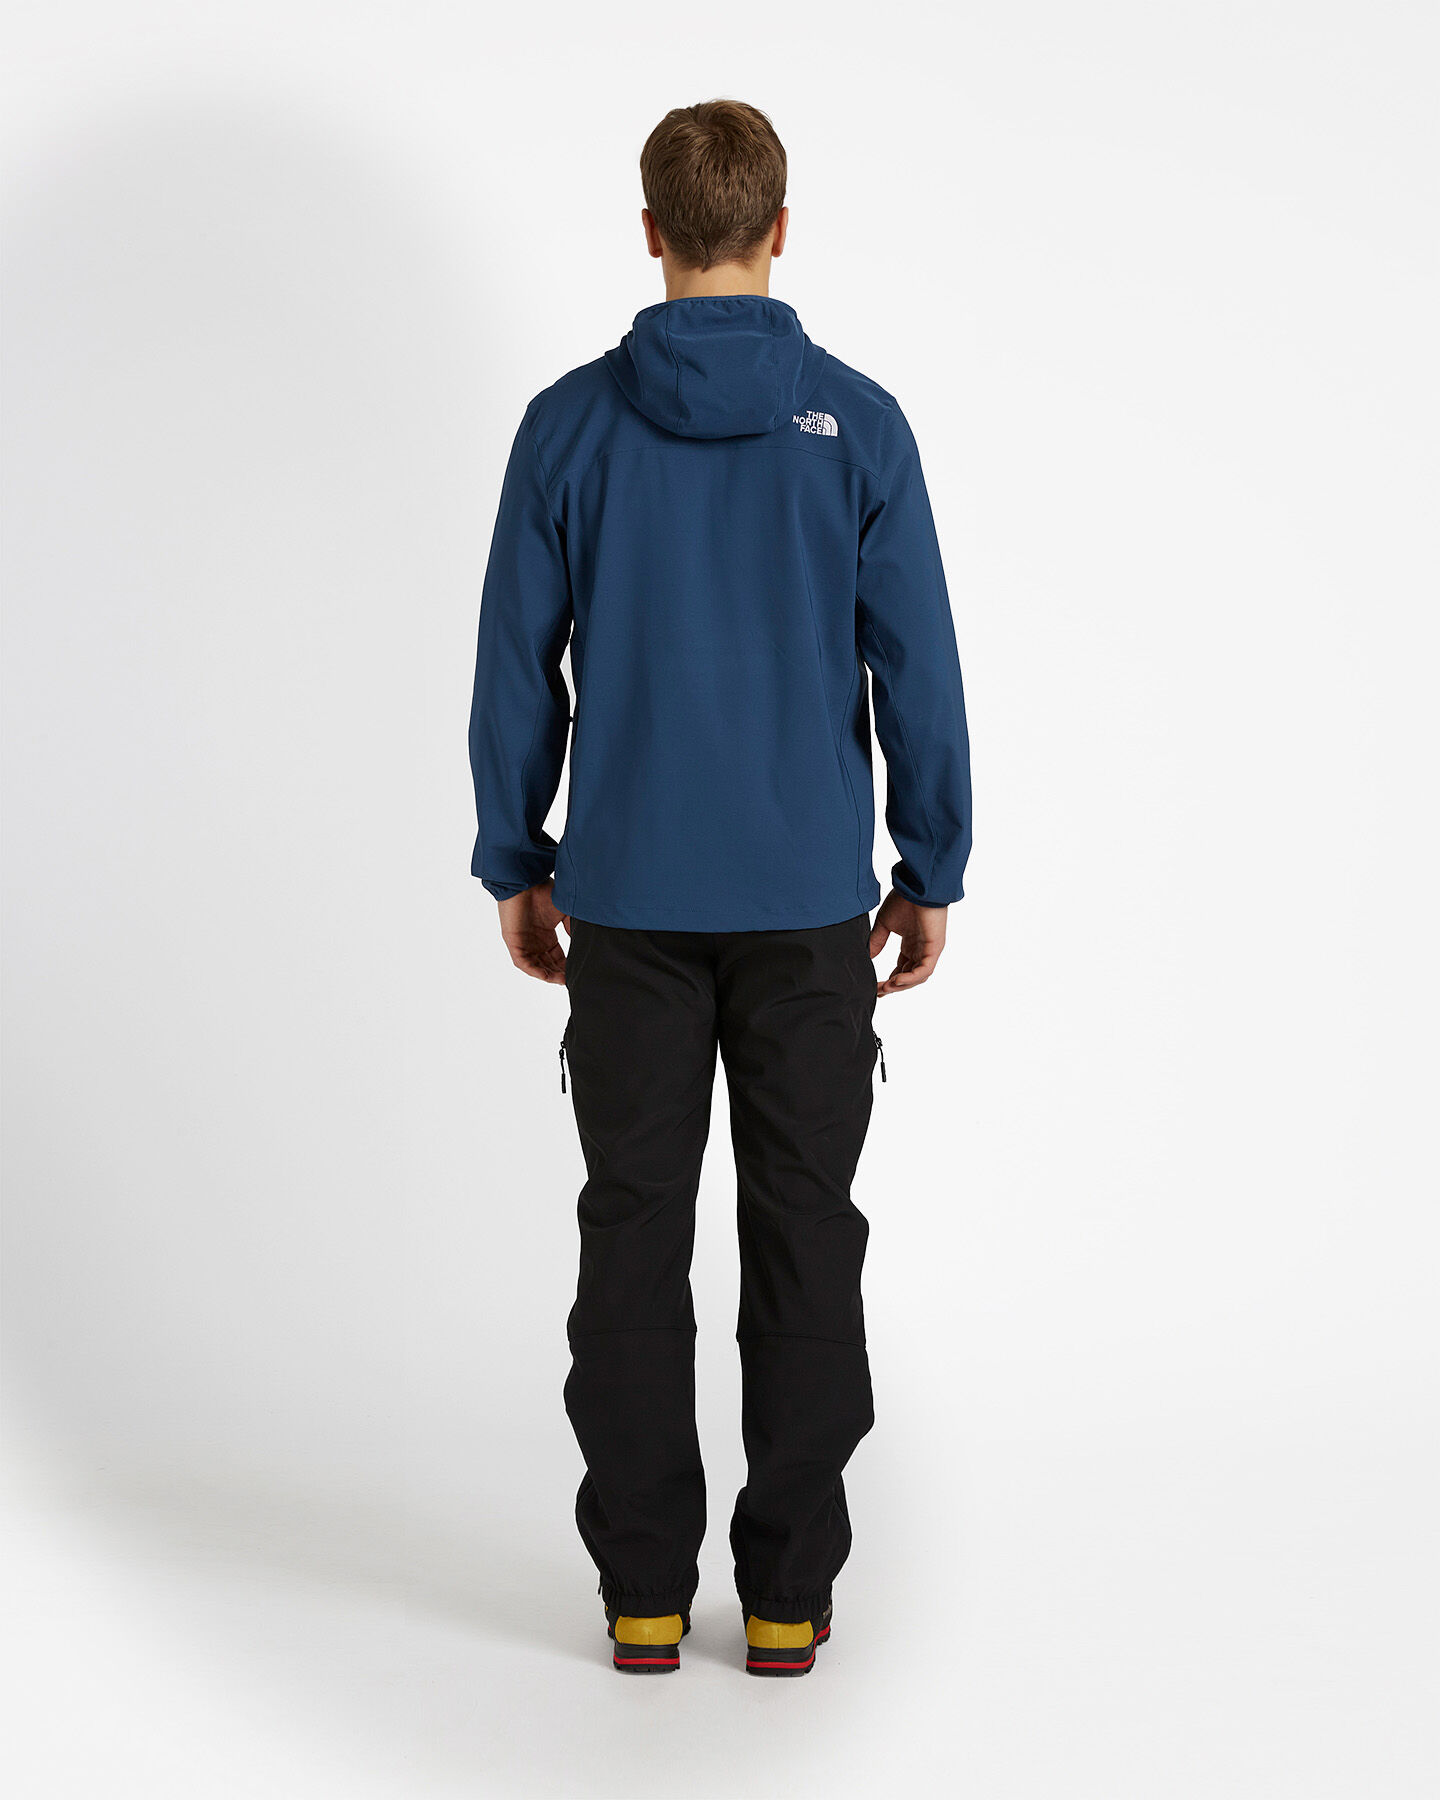  Pile THE NORTH FACE NIMBLE M S5202041|N4L|S scatto 2